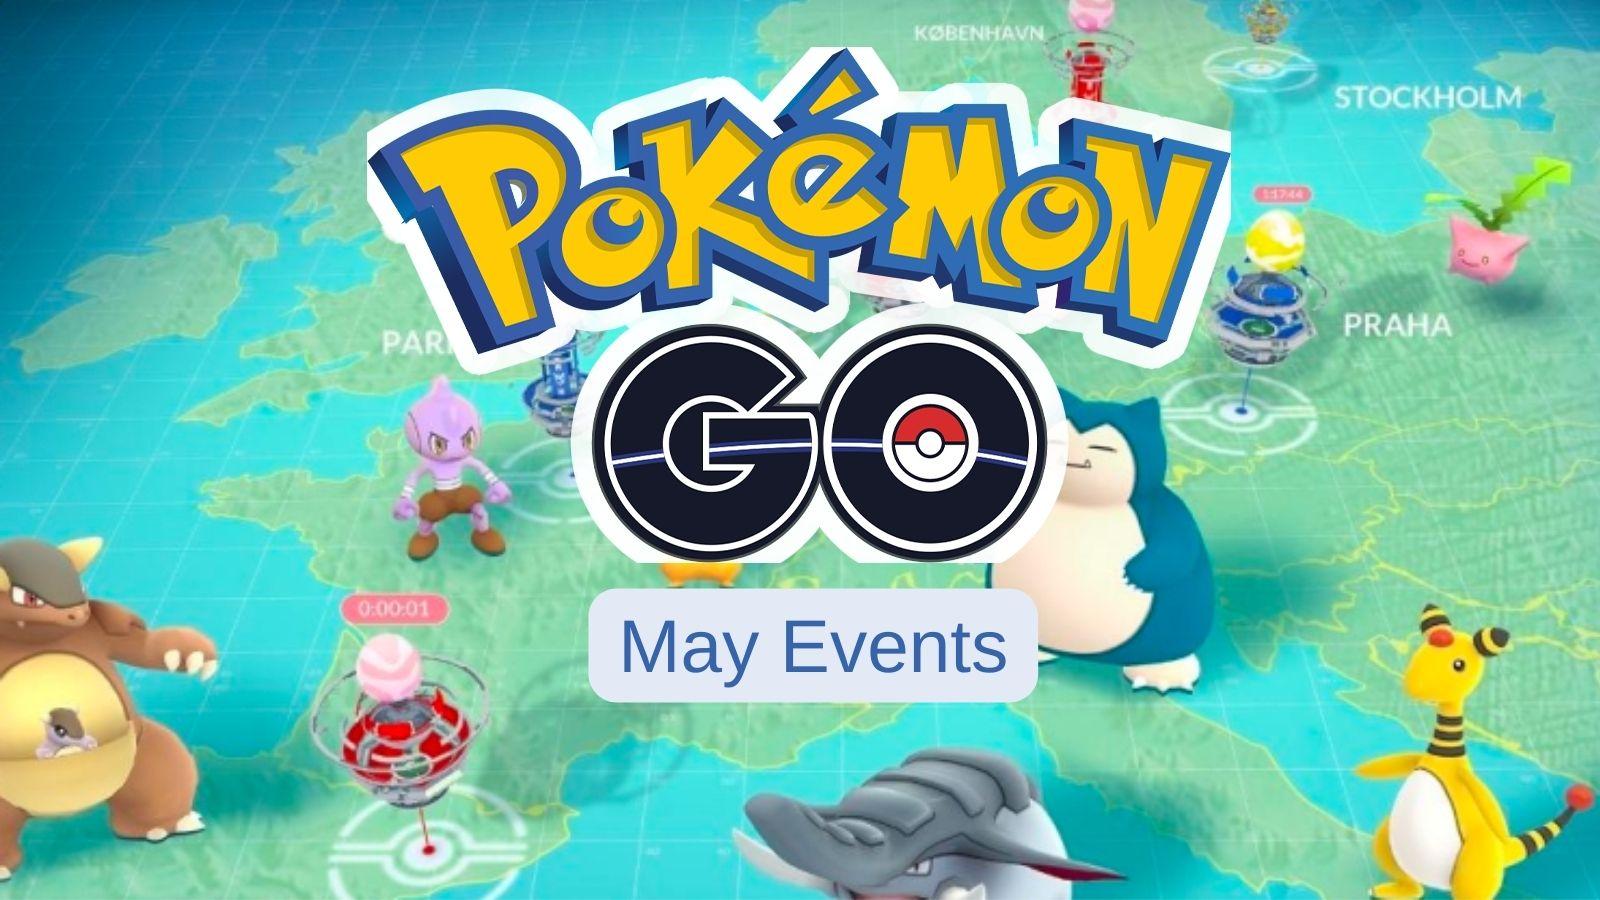 Pokemon Go events during May